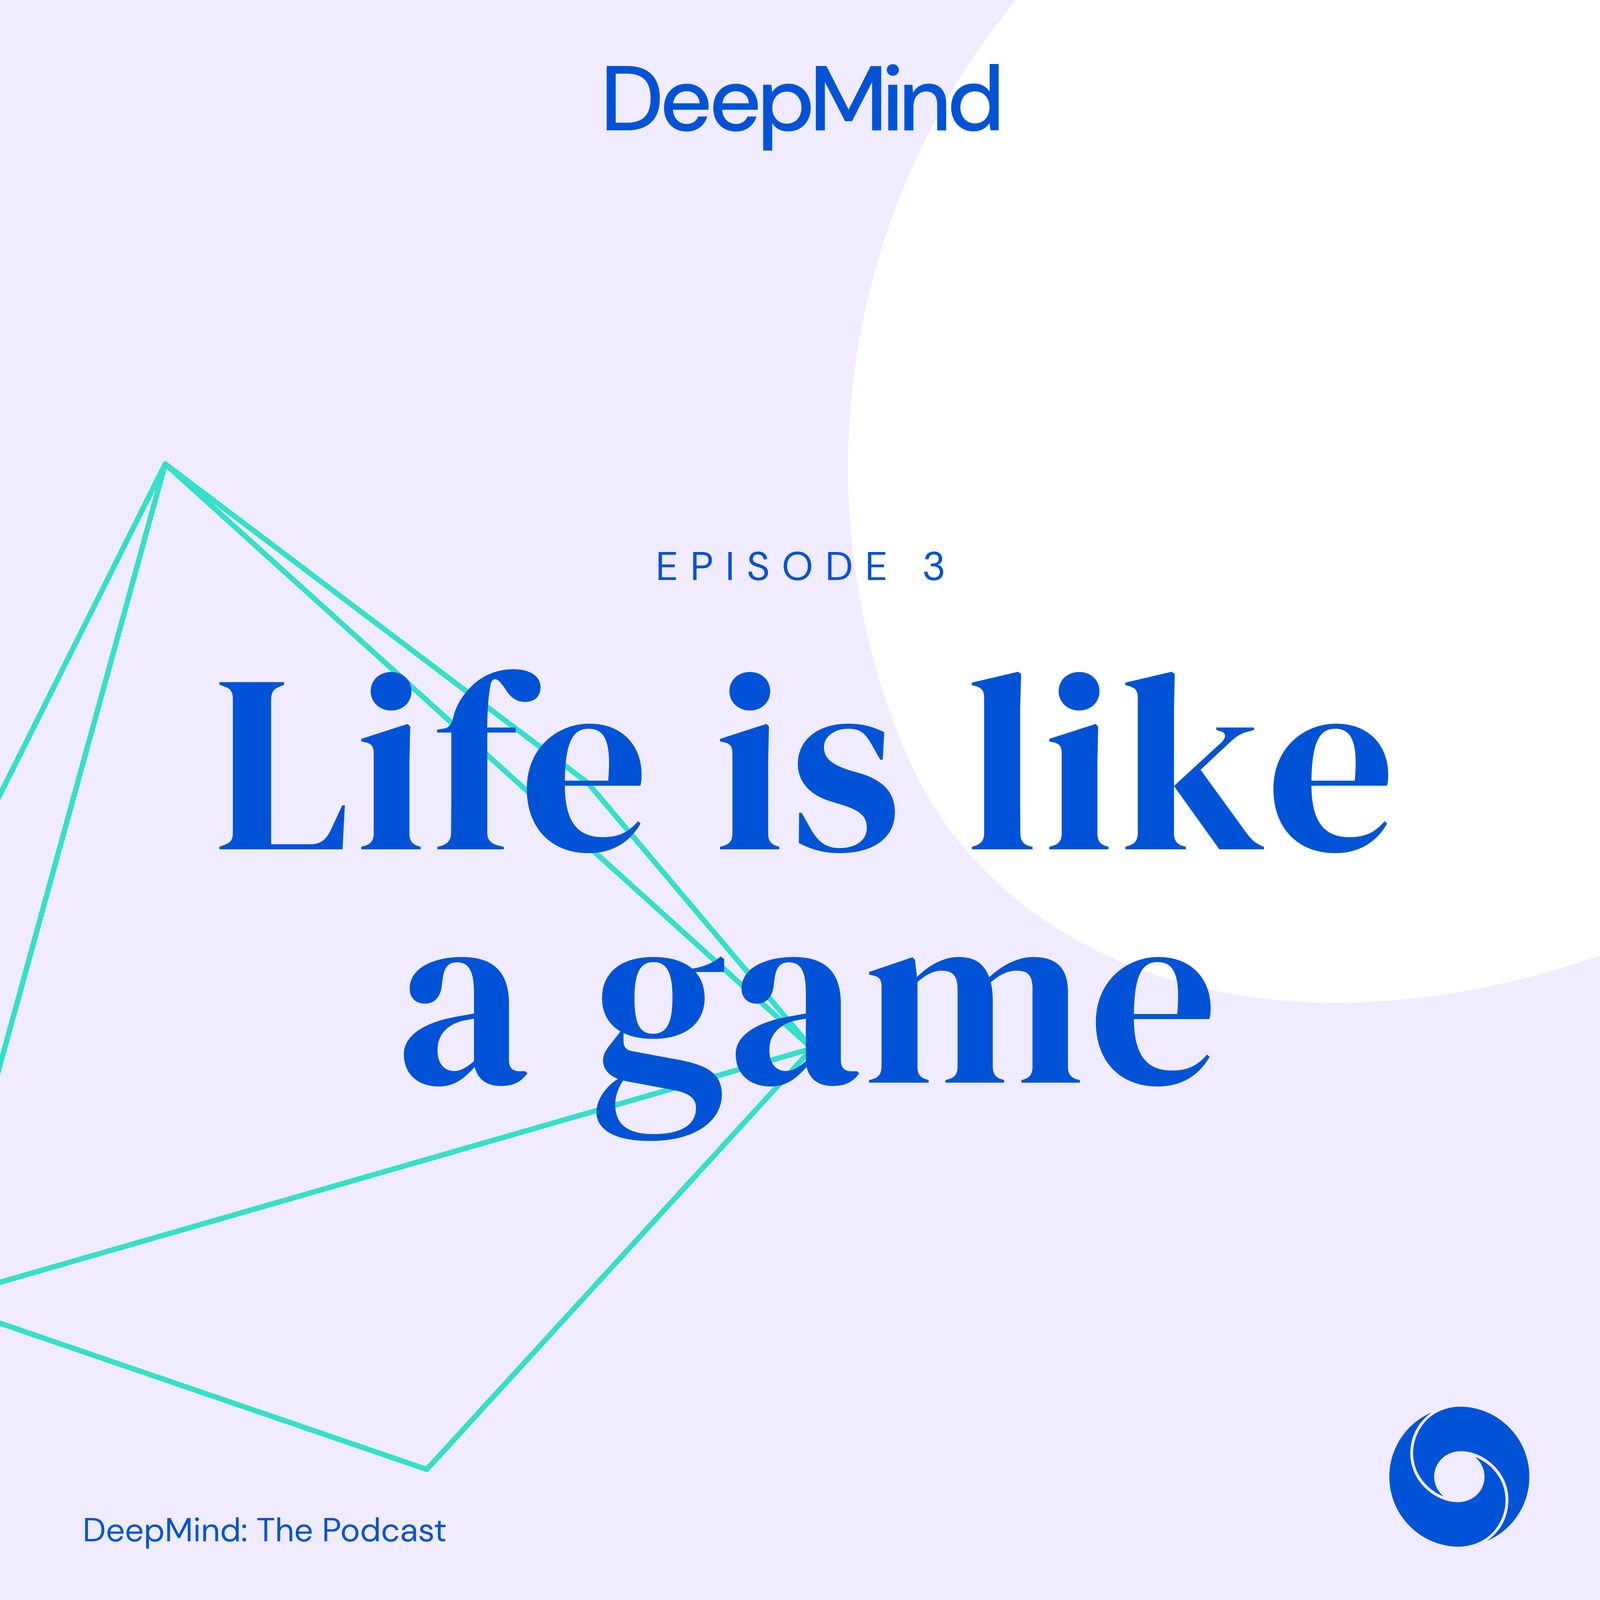 S1 Ep3: Life is like a game